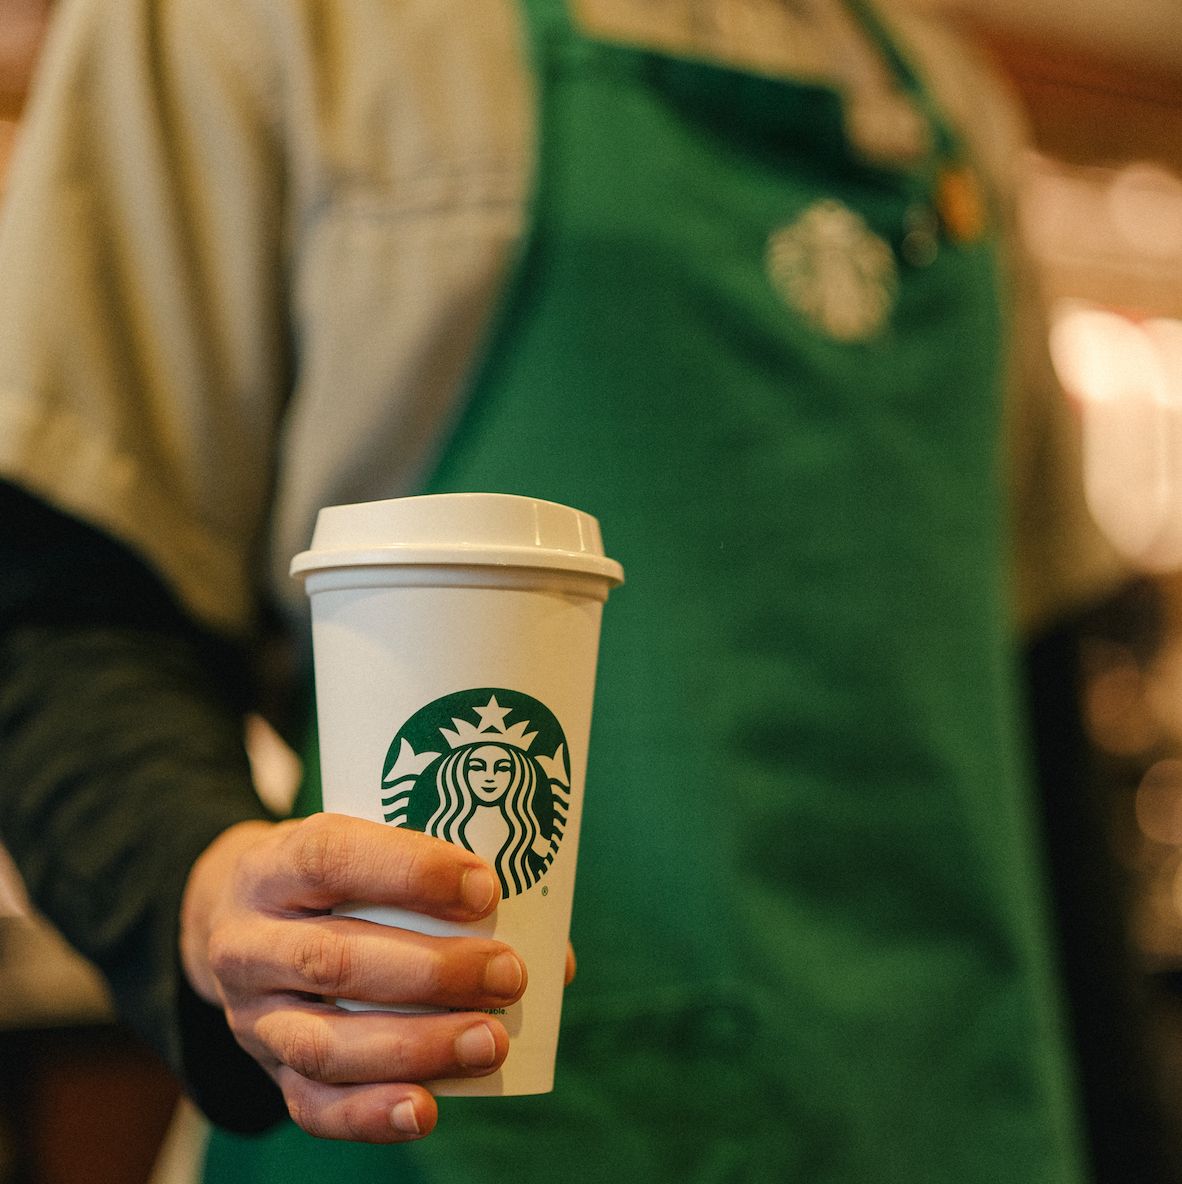 https://hips.hearstapps.com/hmg-prod/images/starbucks-sustainability-commitment-reusable-cups-1584369922.jpg?crop=0.591xw:0.888xh;0.140xw,0.0954xh&resize=1200:*